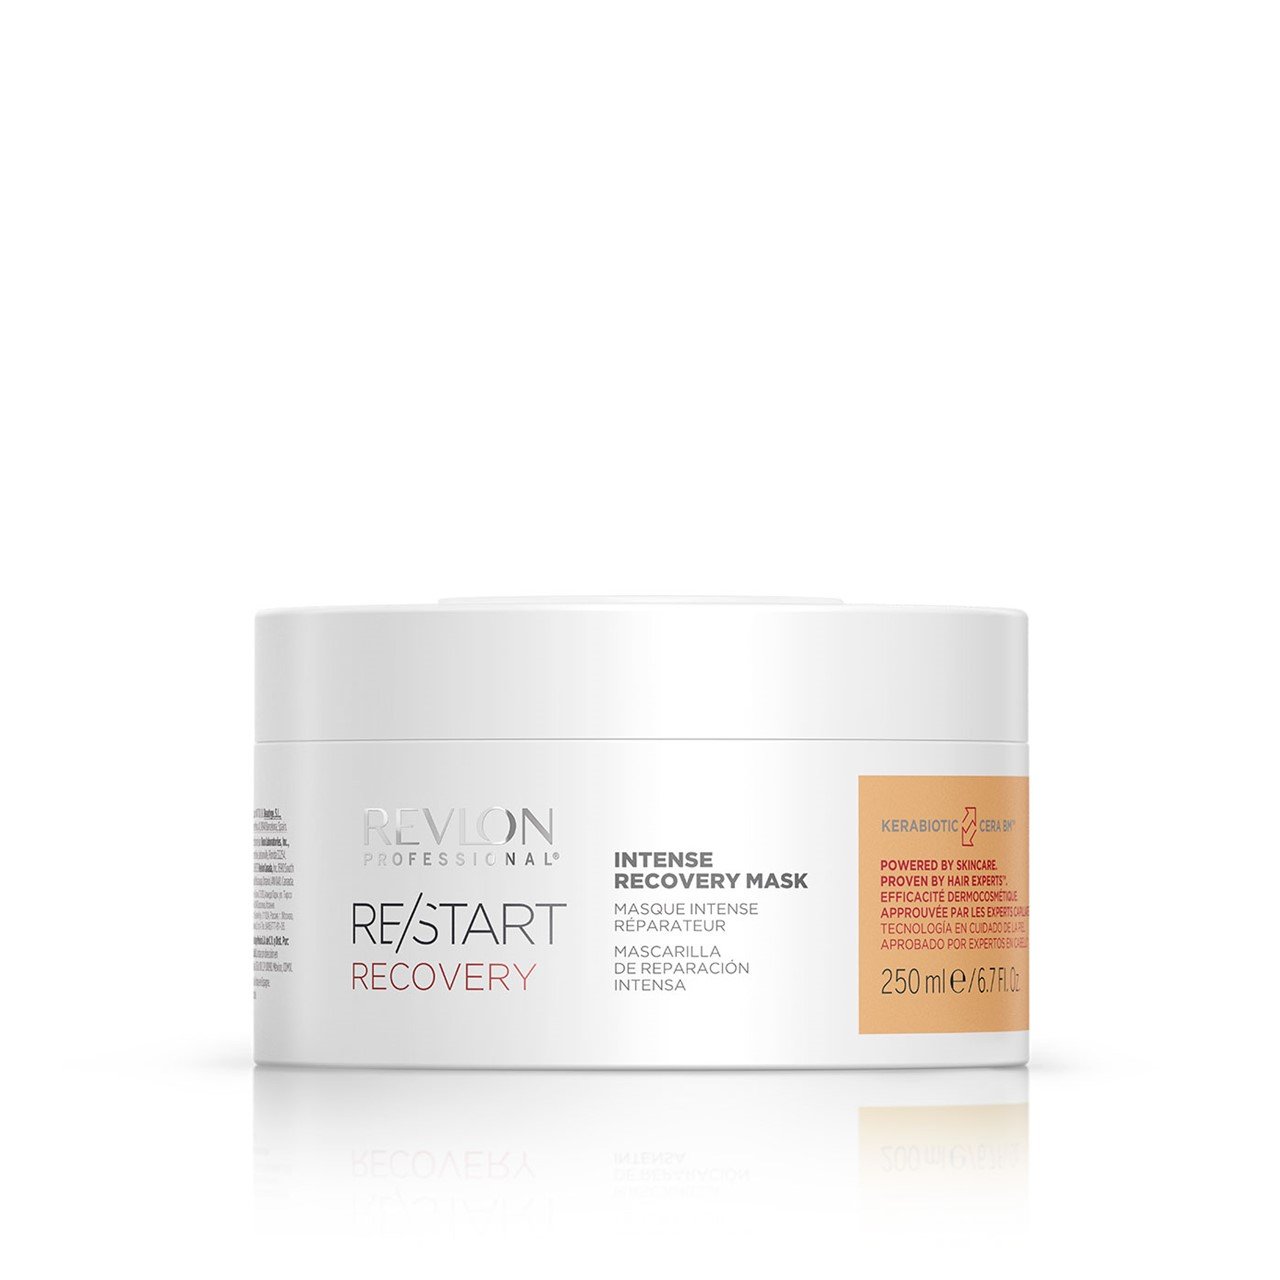 Revlon Professional Re/Start Recovery Intense Recovery Mask